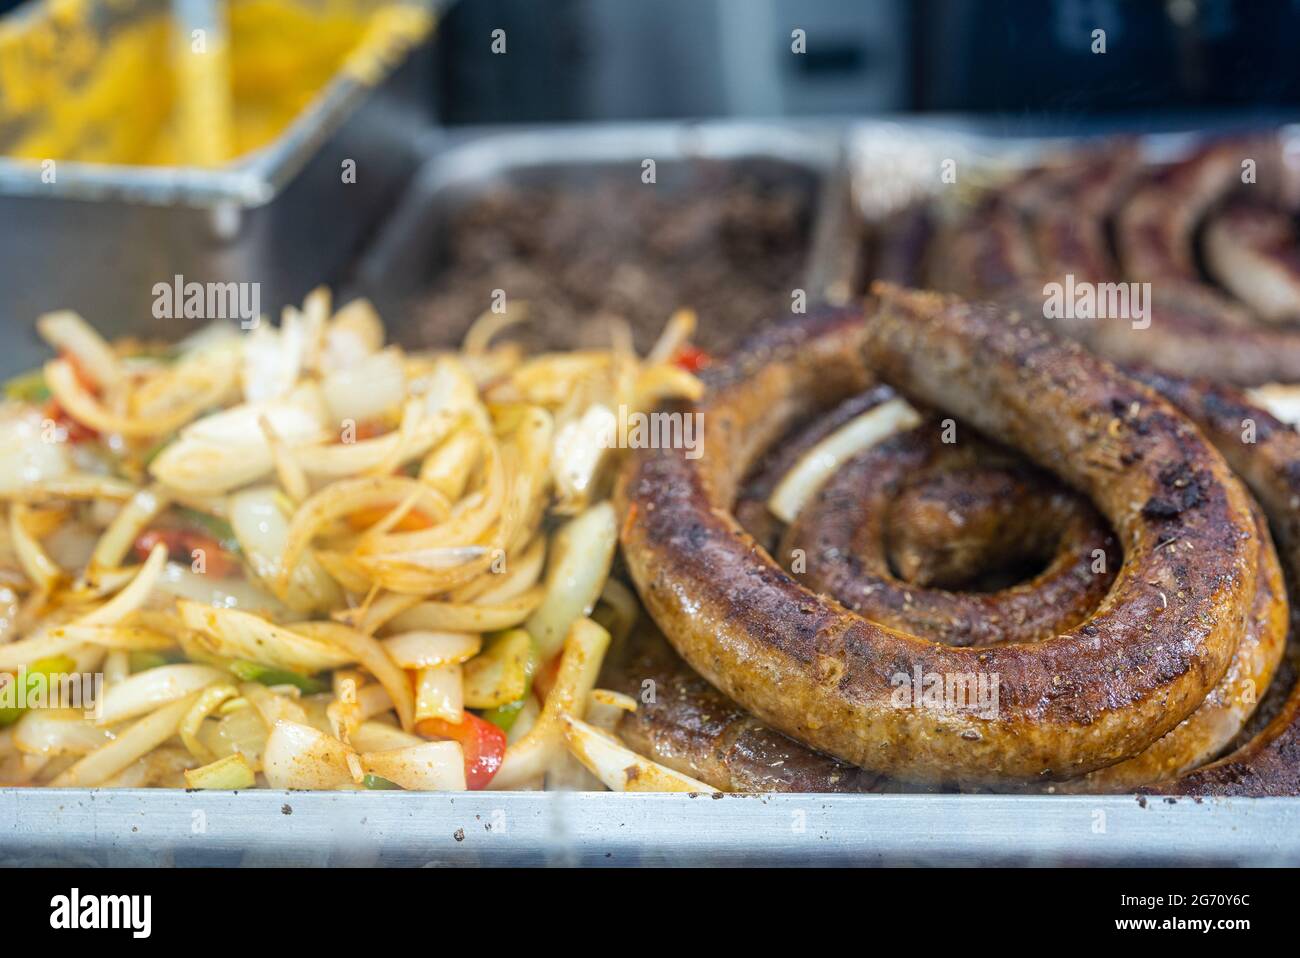 A Spicy Italian Sausage with Onions from a Carnival in New Jersey. Stock Photo